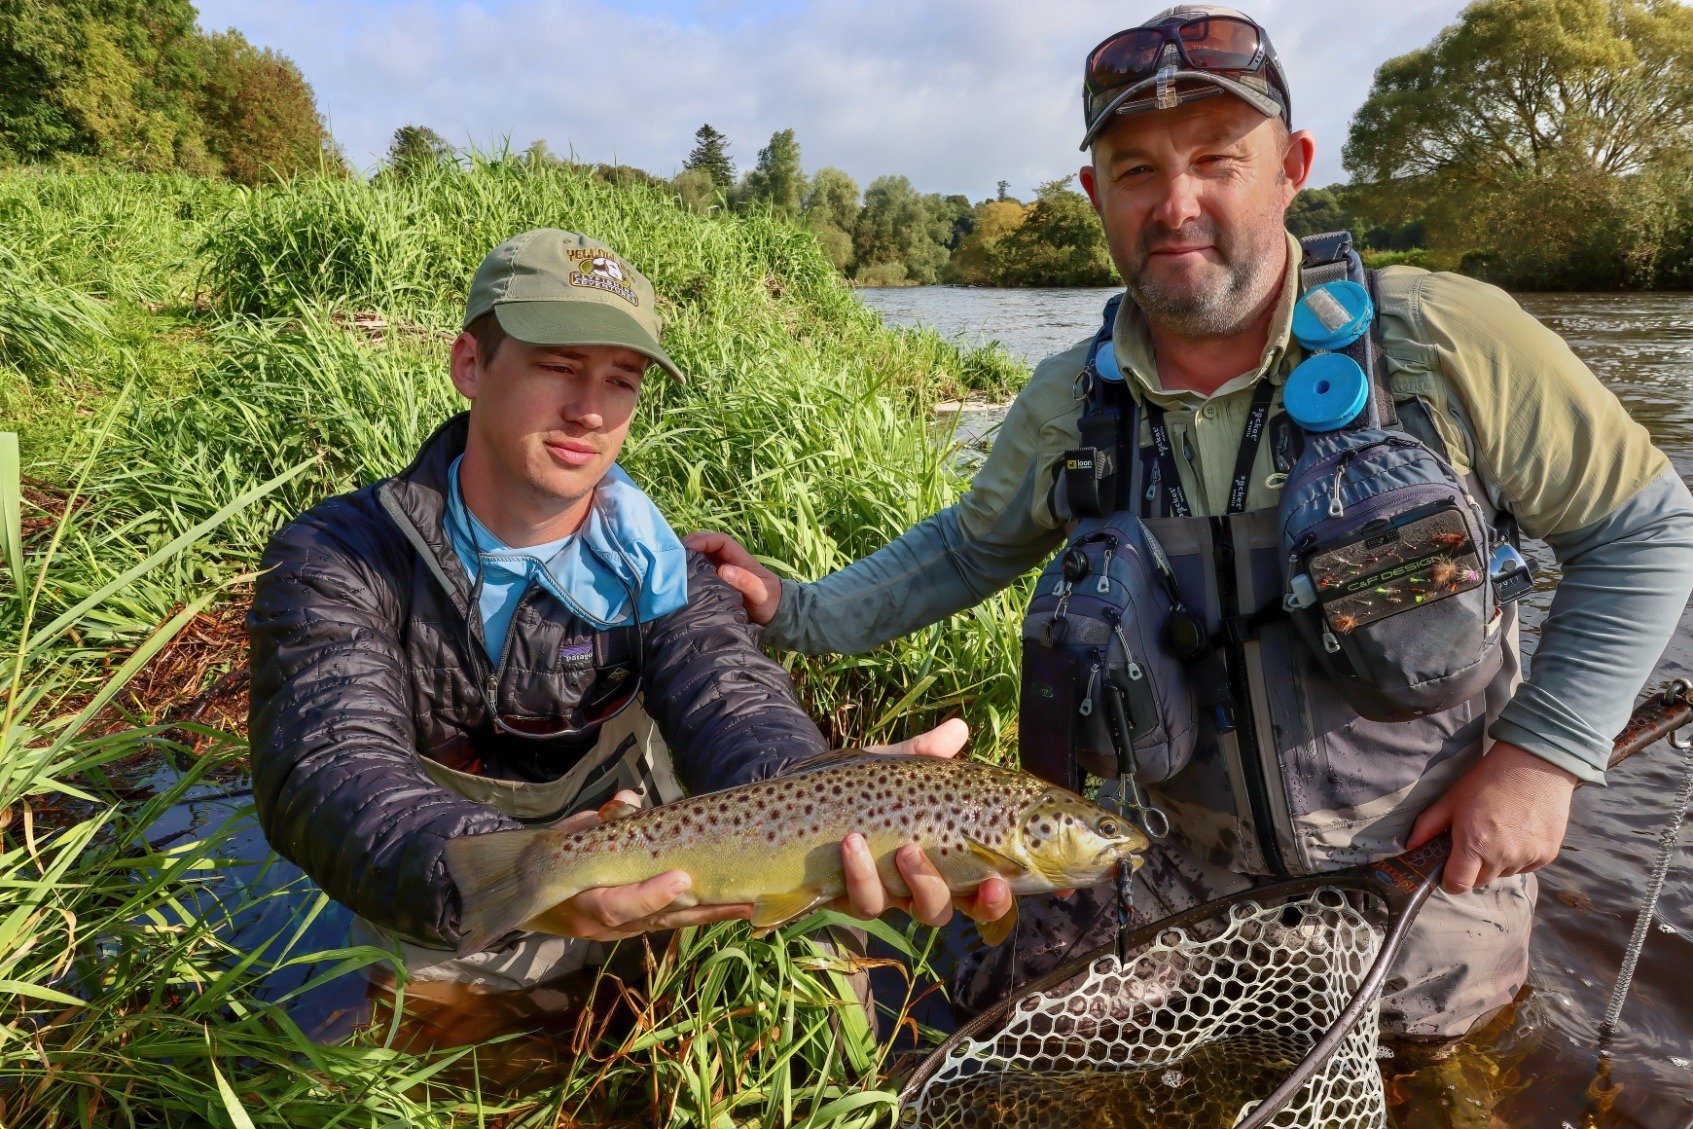 Clonanav Fly Fishing – Guided Fly Fishing in Ireland – The BEST